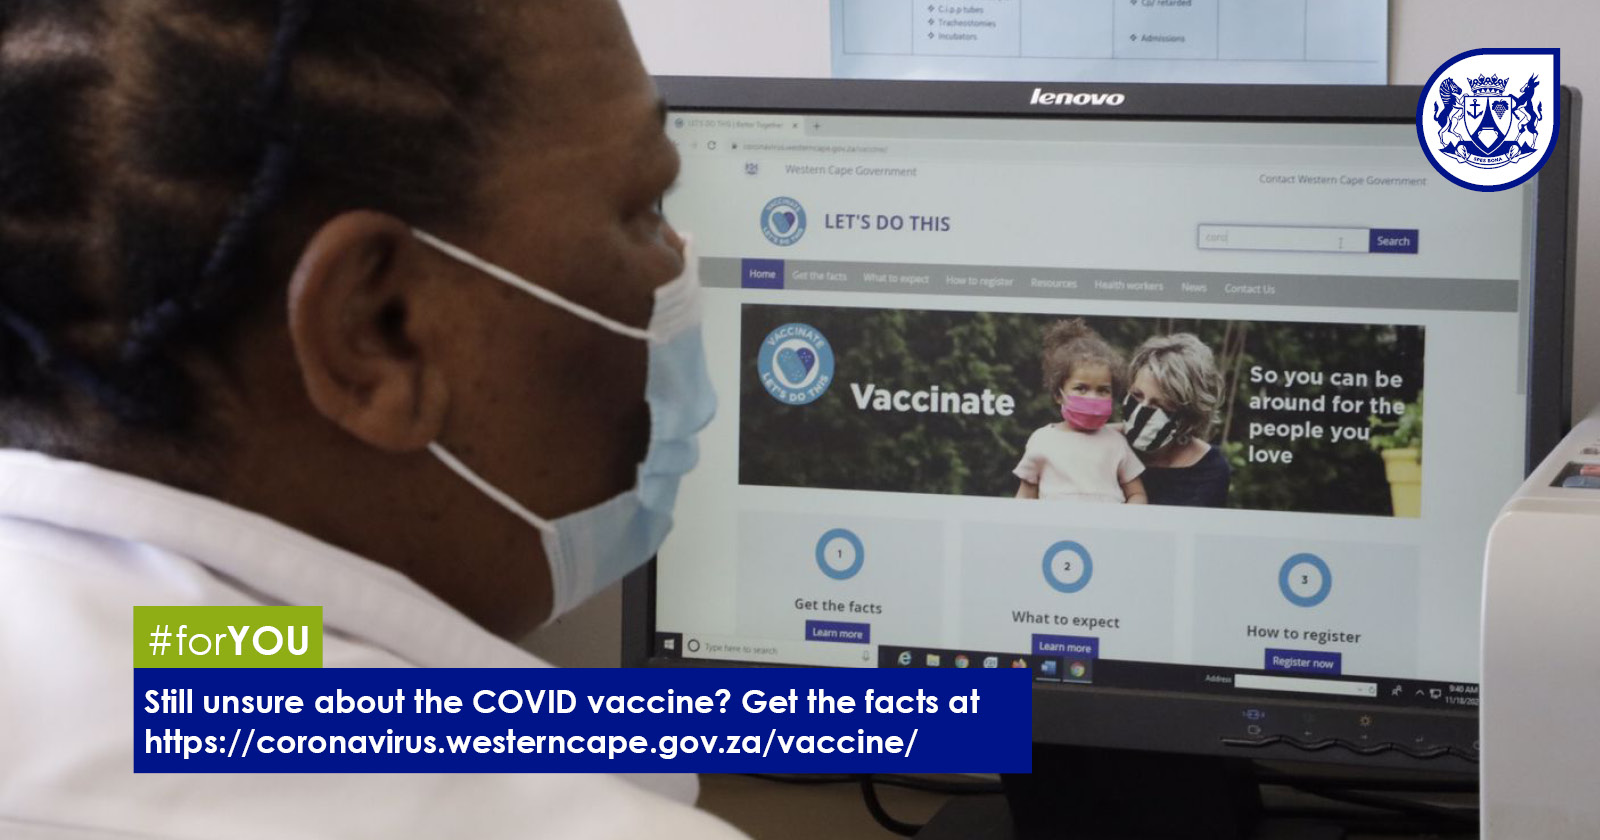 Get the facts, surfing the internet, find out more about the Covid-19 Vaccine